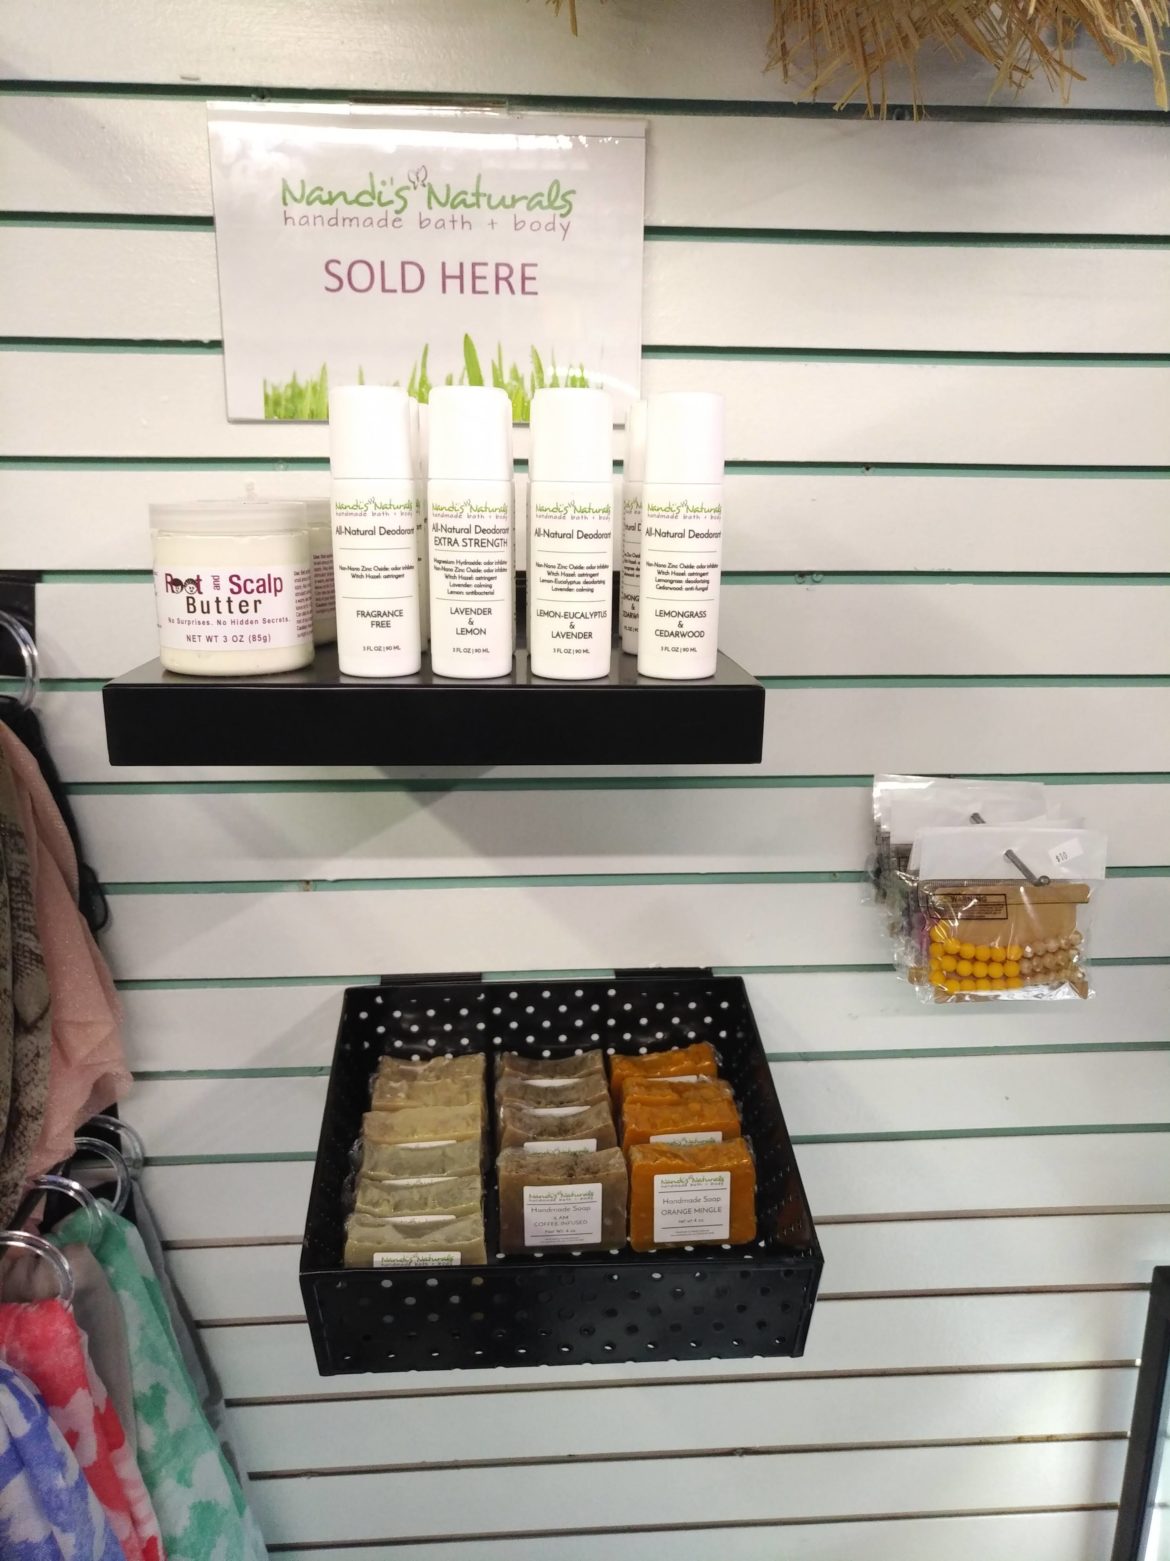 image of nandi's naturals products on store shelves